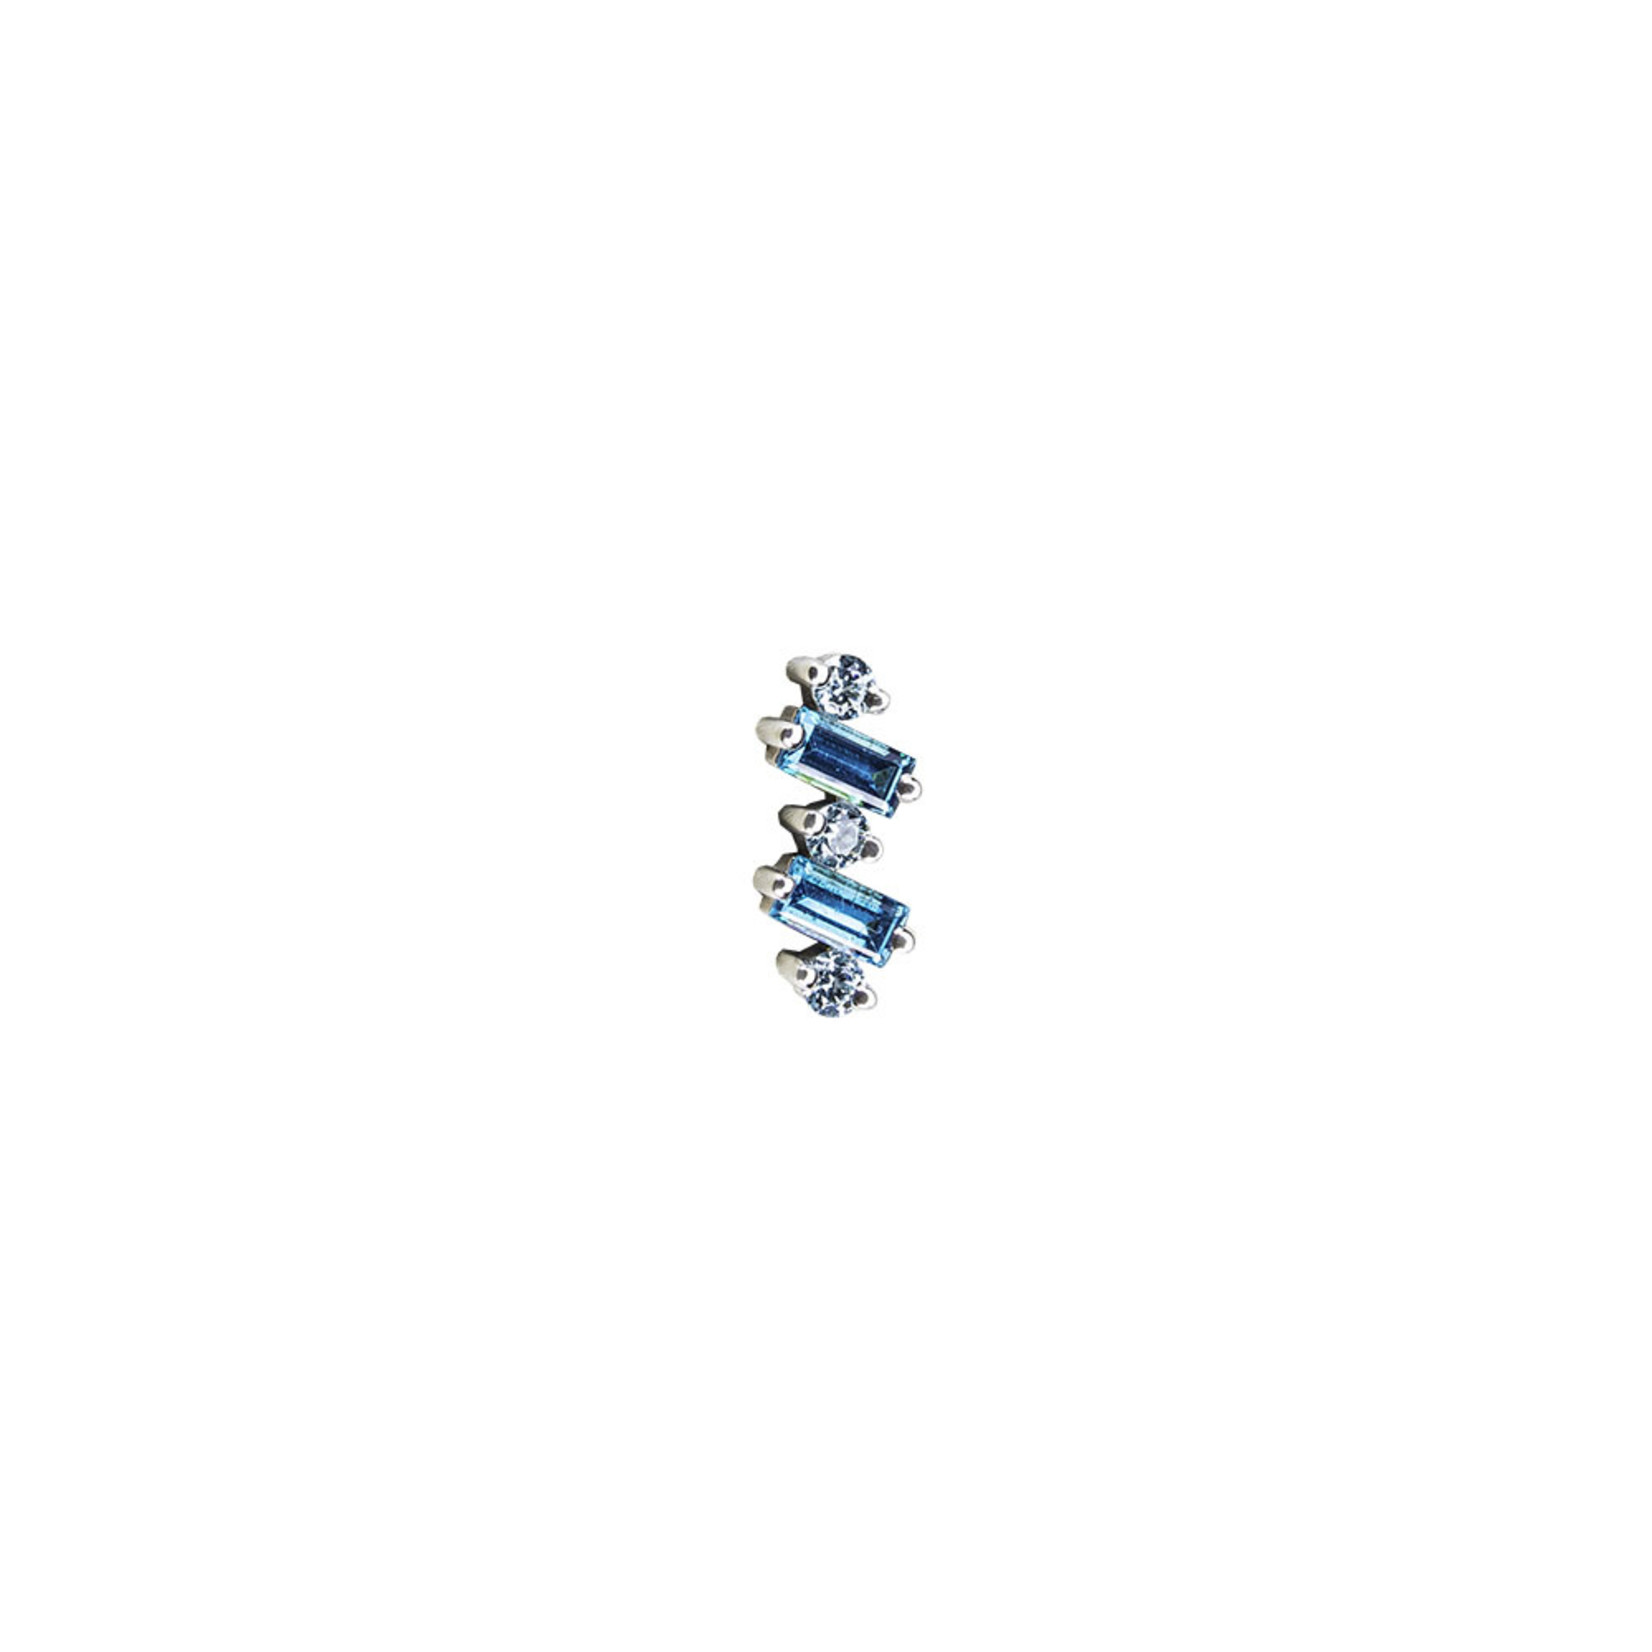 BVLA BVLA white gold "Divina" threaded end with 2x 4x2 baguette prong AA Paraiba topaz and 3x 2.0 cyan CZ